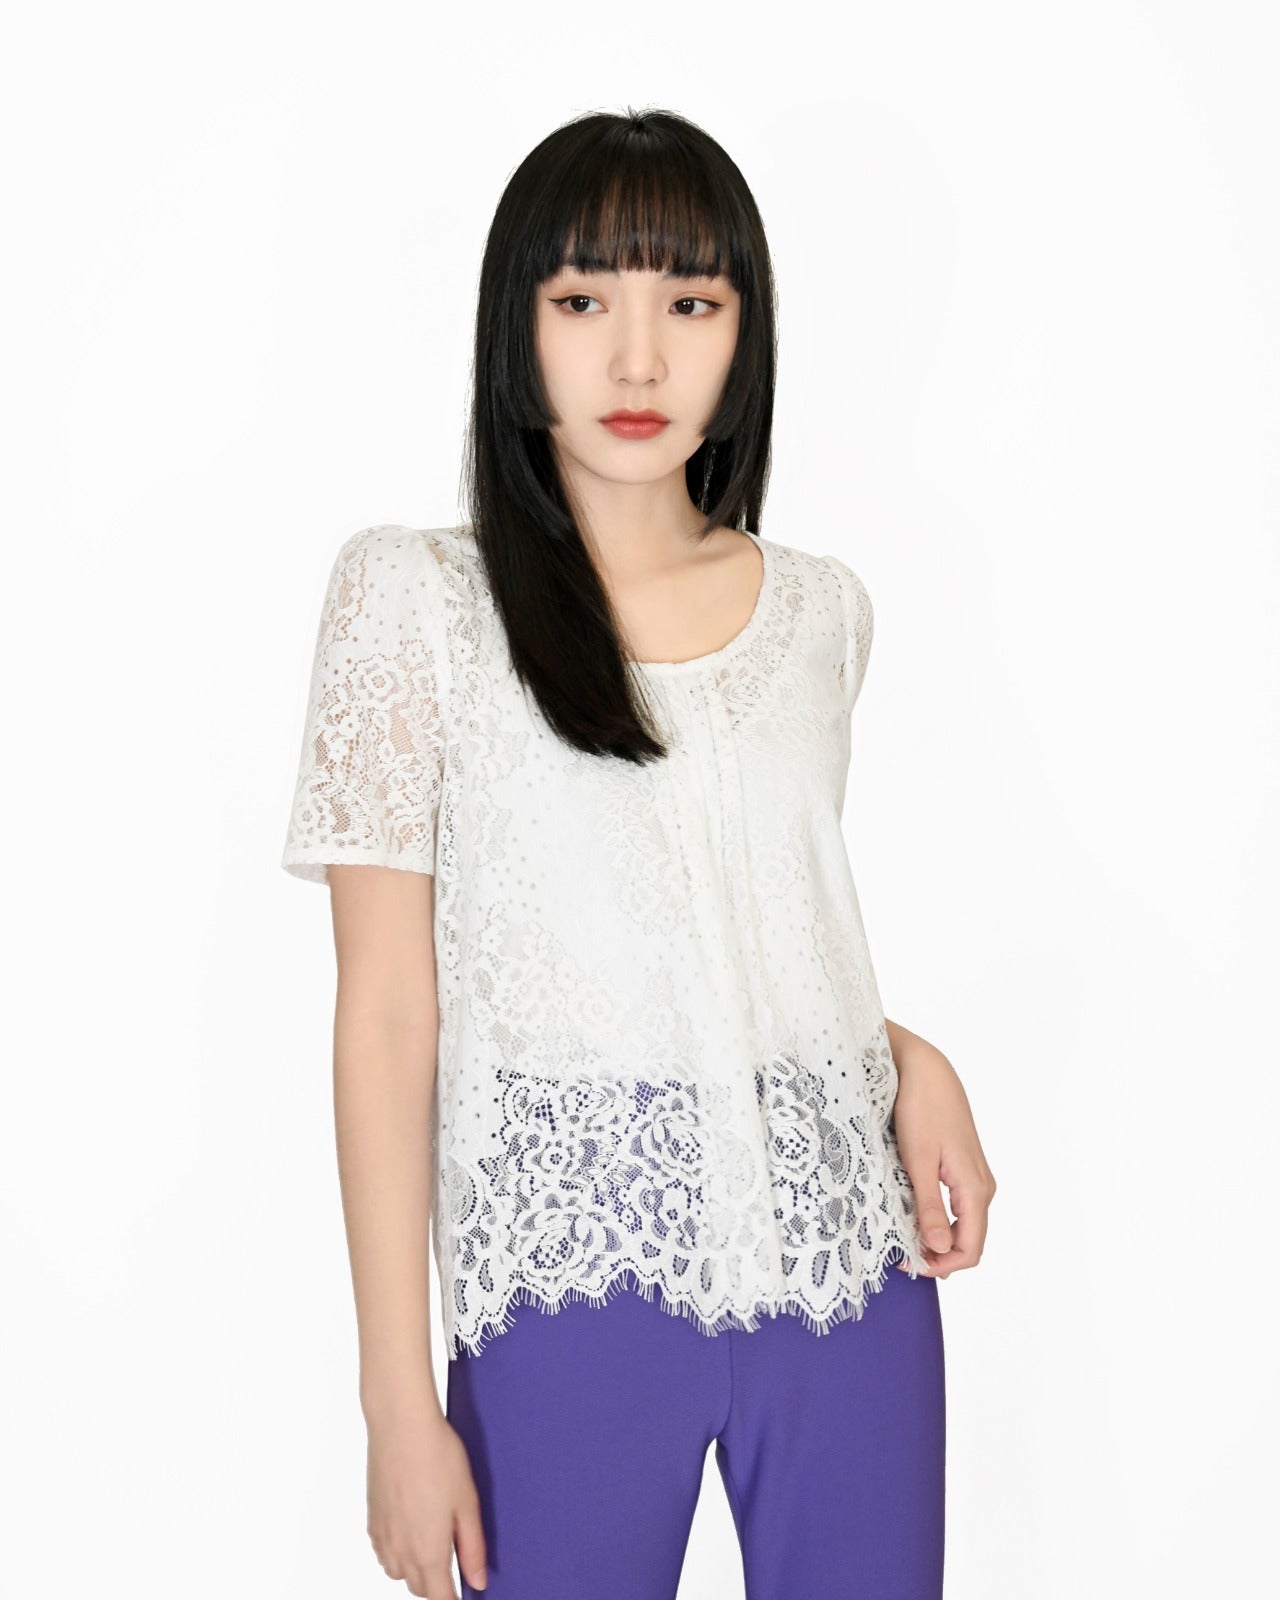 aalis FION pleated lace top (White)